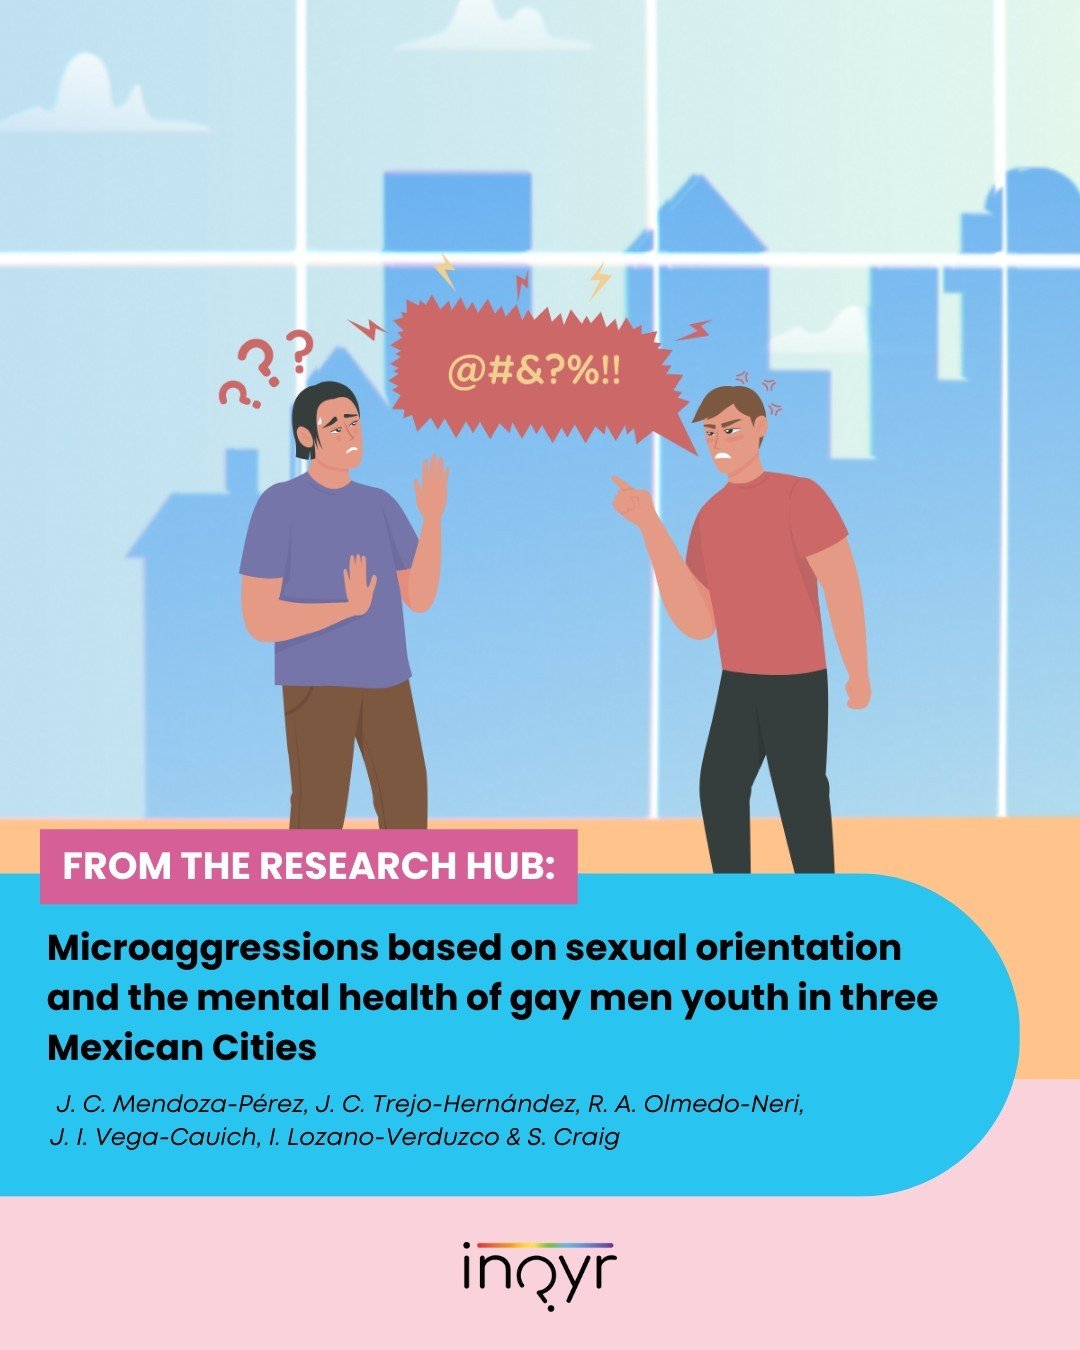 Gay men in Mexico have increasingly recognized and exercised their human rights in the last decade, however, discrimination persists: 56% of gay male participants in the National Survey on Sexual Orientation and Gender Identity Discrimination (ENDOSI